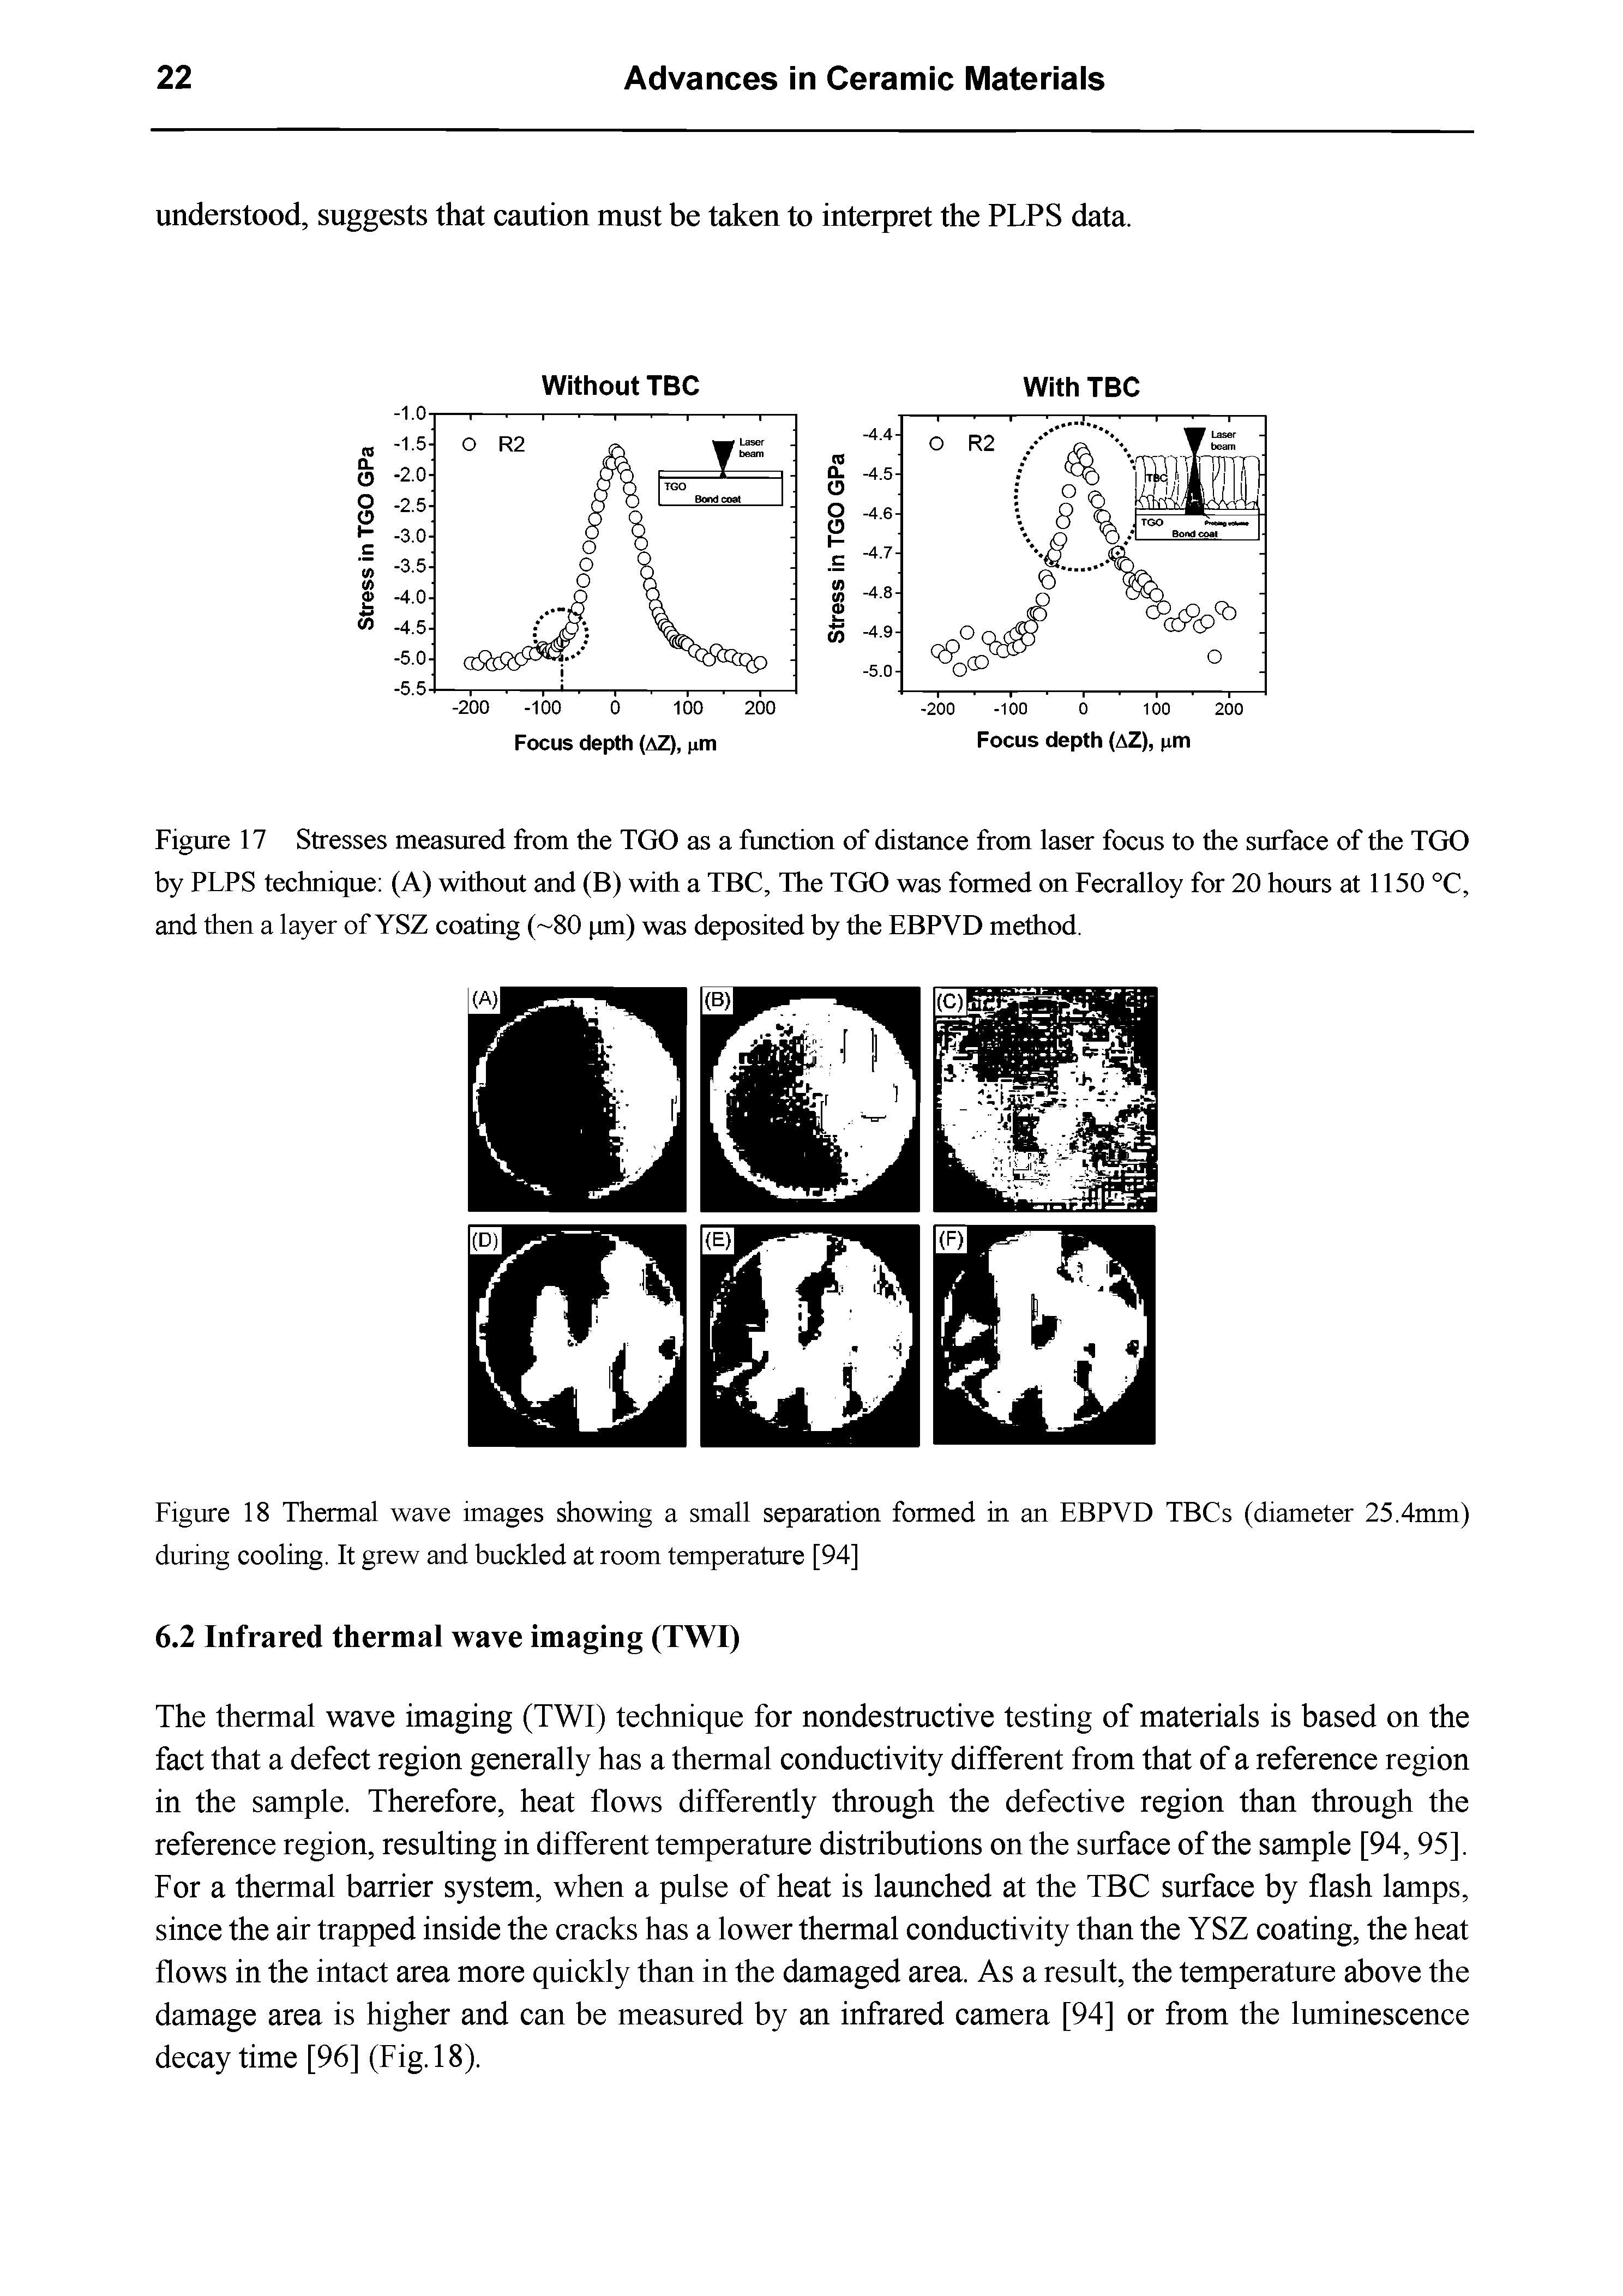 Figure 18 Thermal wave images showing a small separation formed in an EBPVD TBCs (diameter 25.4mm) during cooling. It grew and buckled at room temperature [94]...